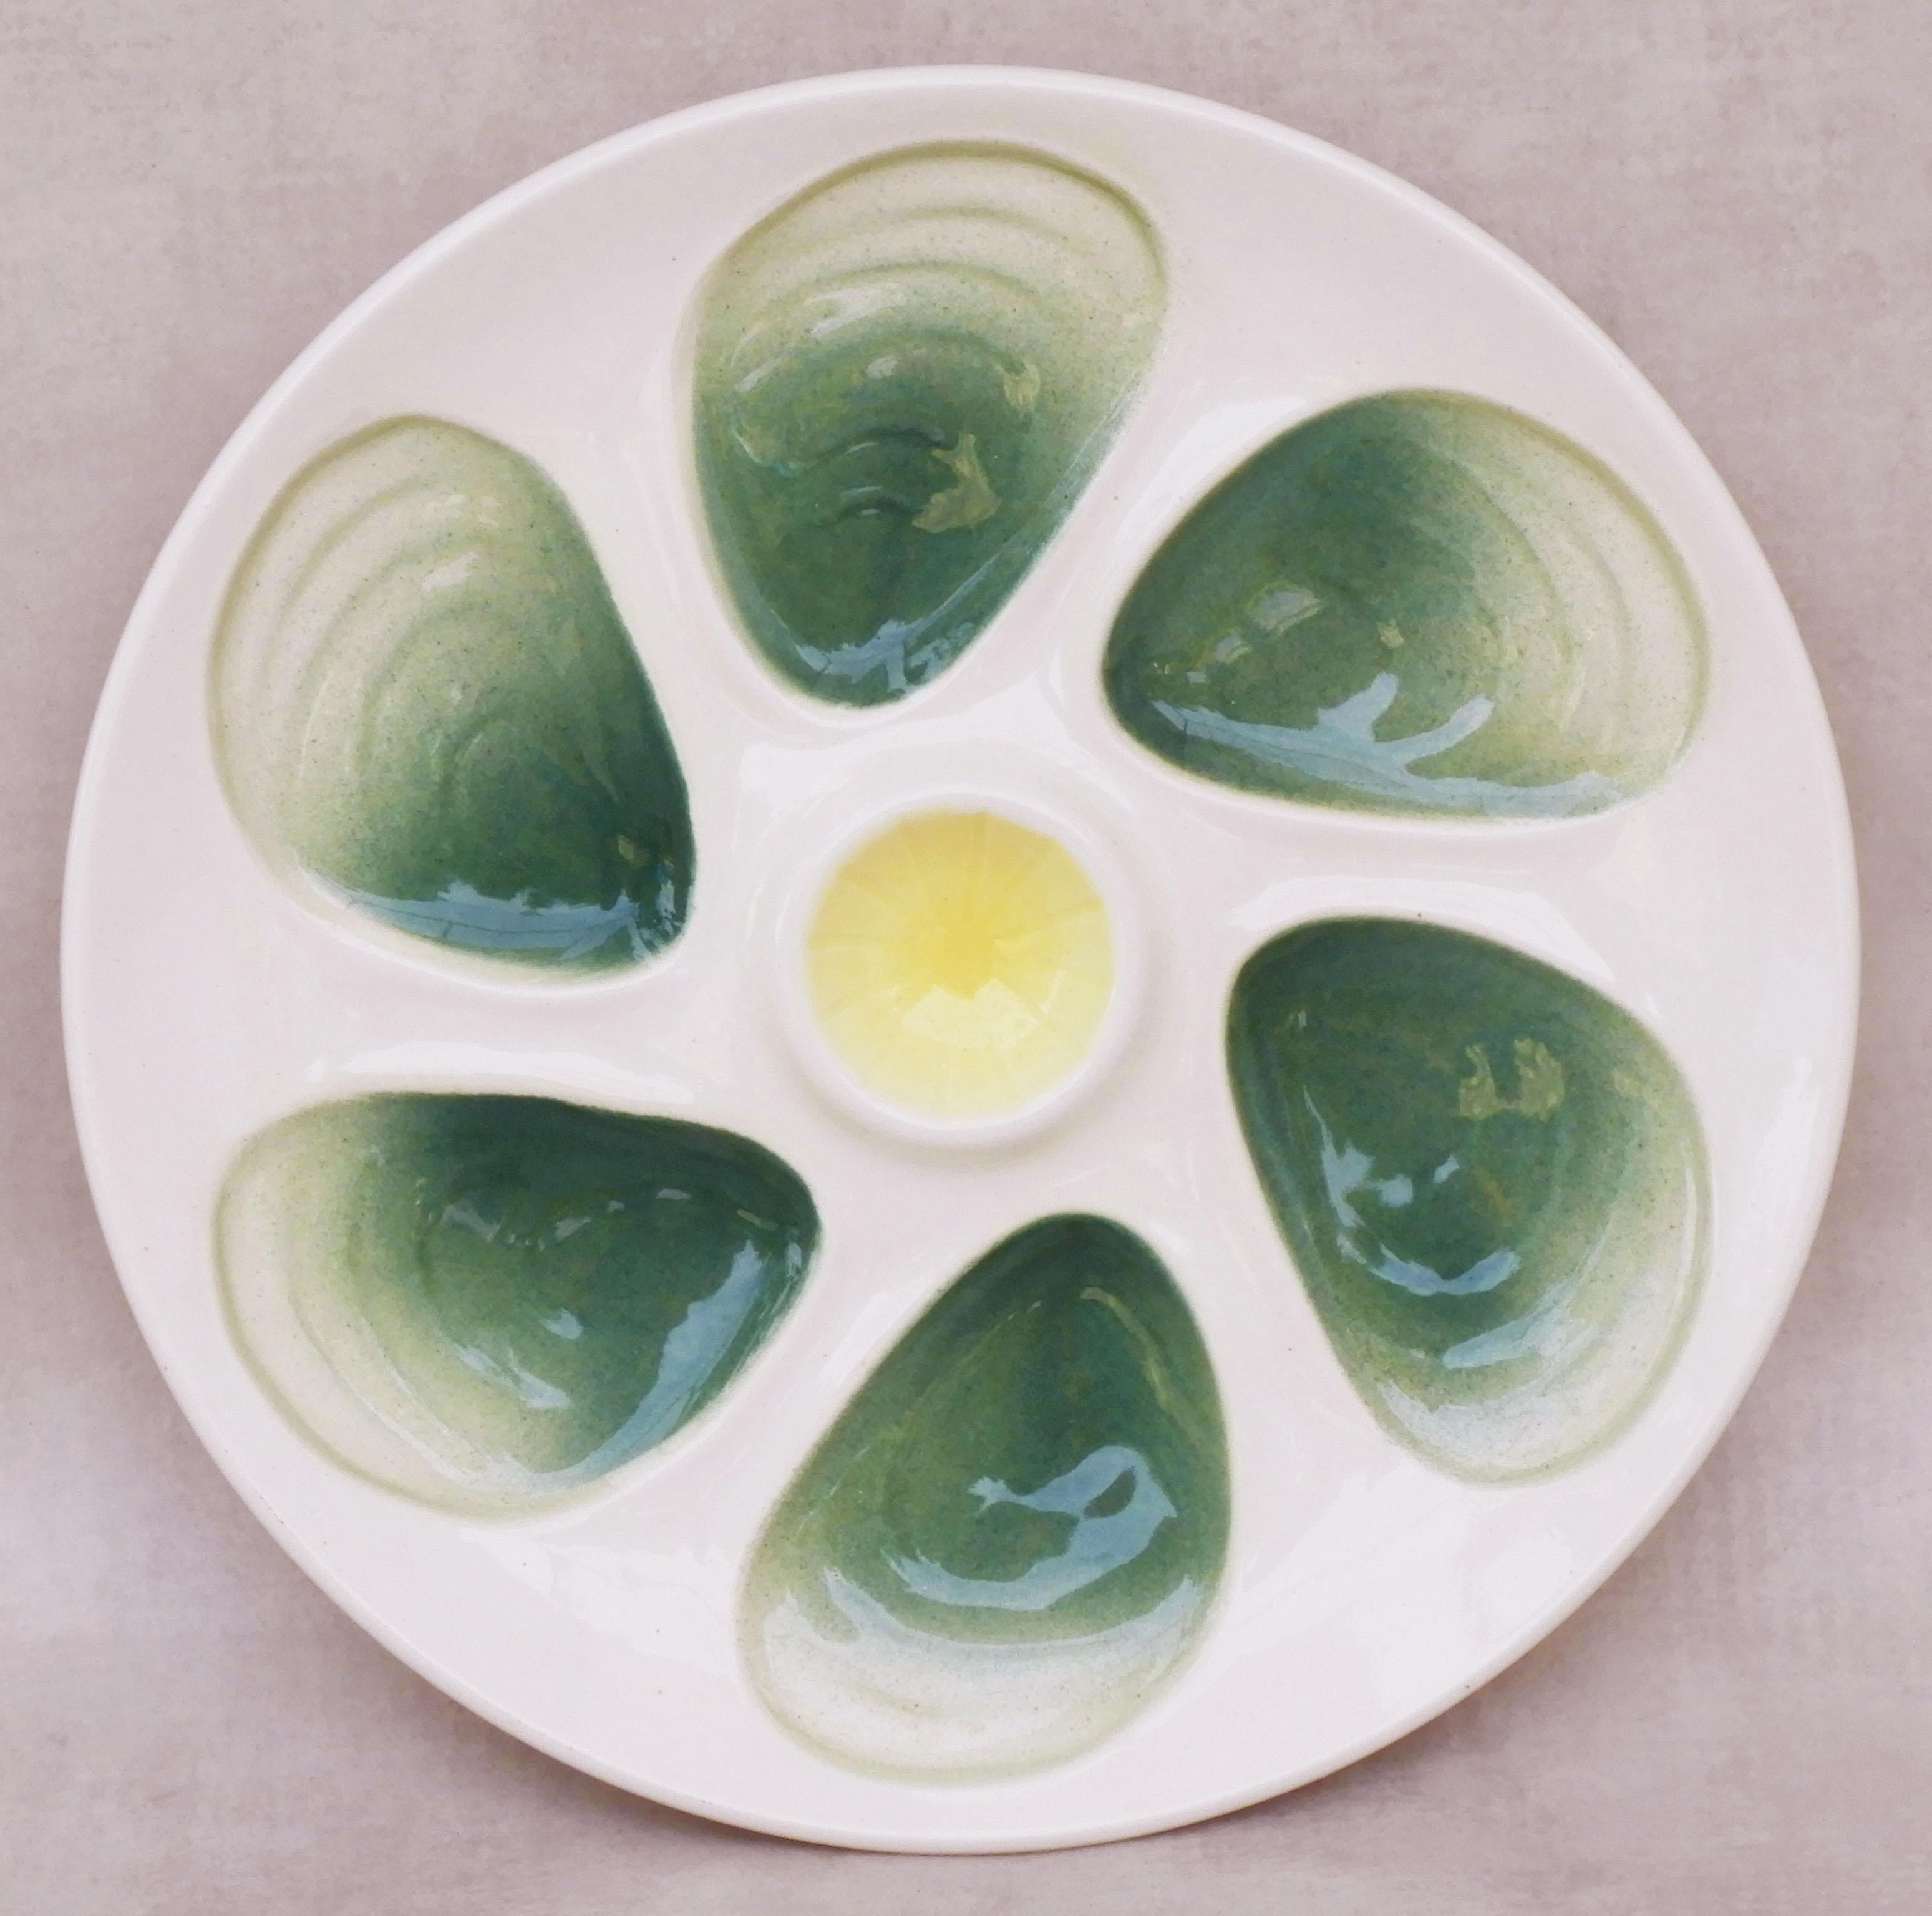 A set of a dozen French mid-century modern oyster plates in green, white and yellow glazed faience.
Twelve stylish high-glazed platters, all in very good vintage condition with no chips or losses.
Each of the twelve plates measures 9.65″ (24.5cm) in